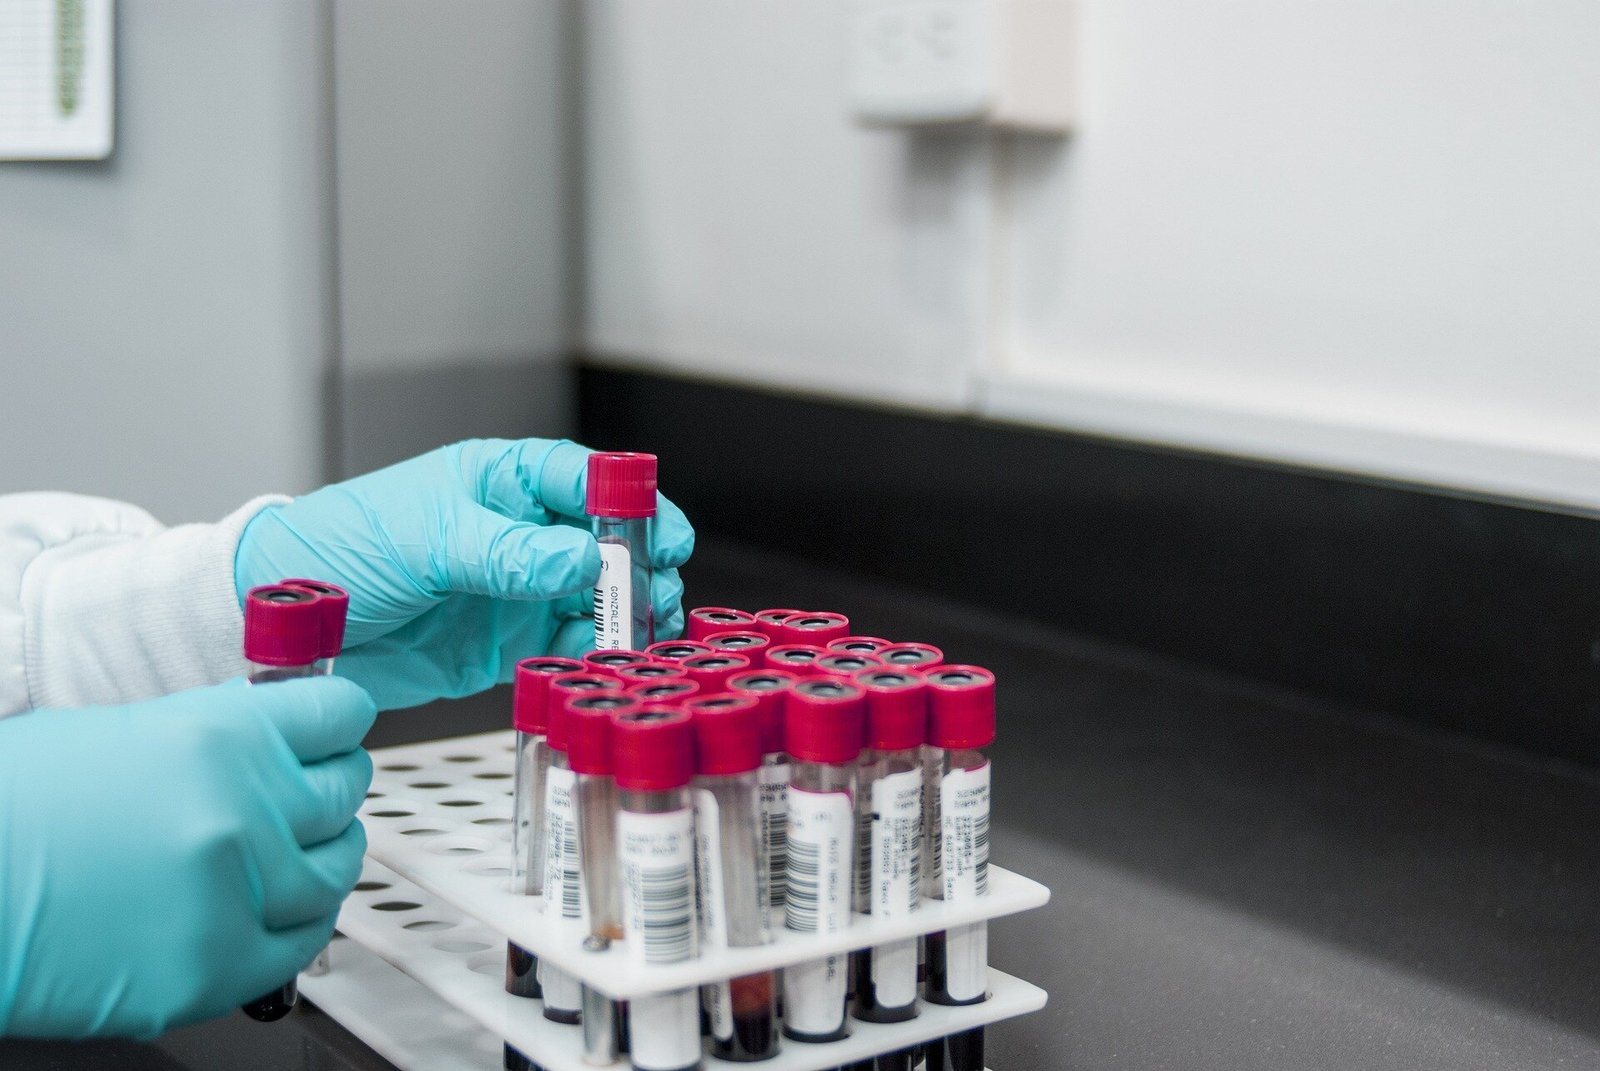 New blood test for stroke detection combines blood based biomarkers with a clinical score